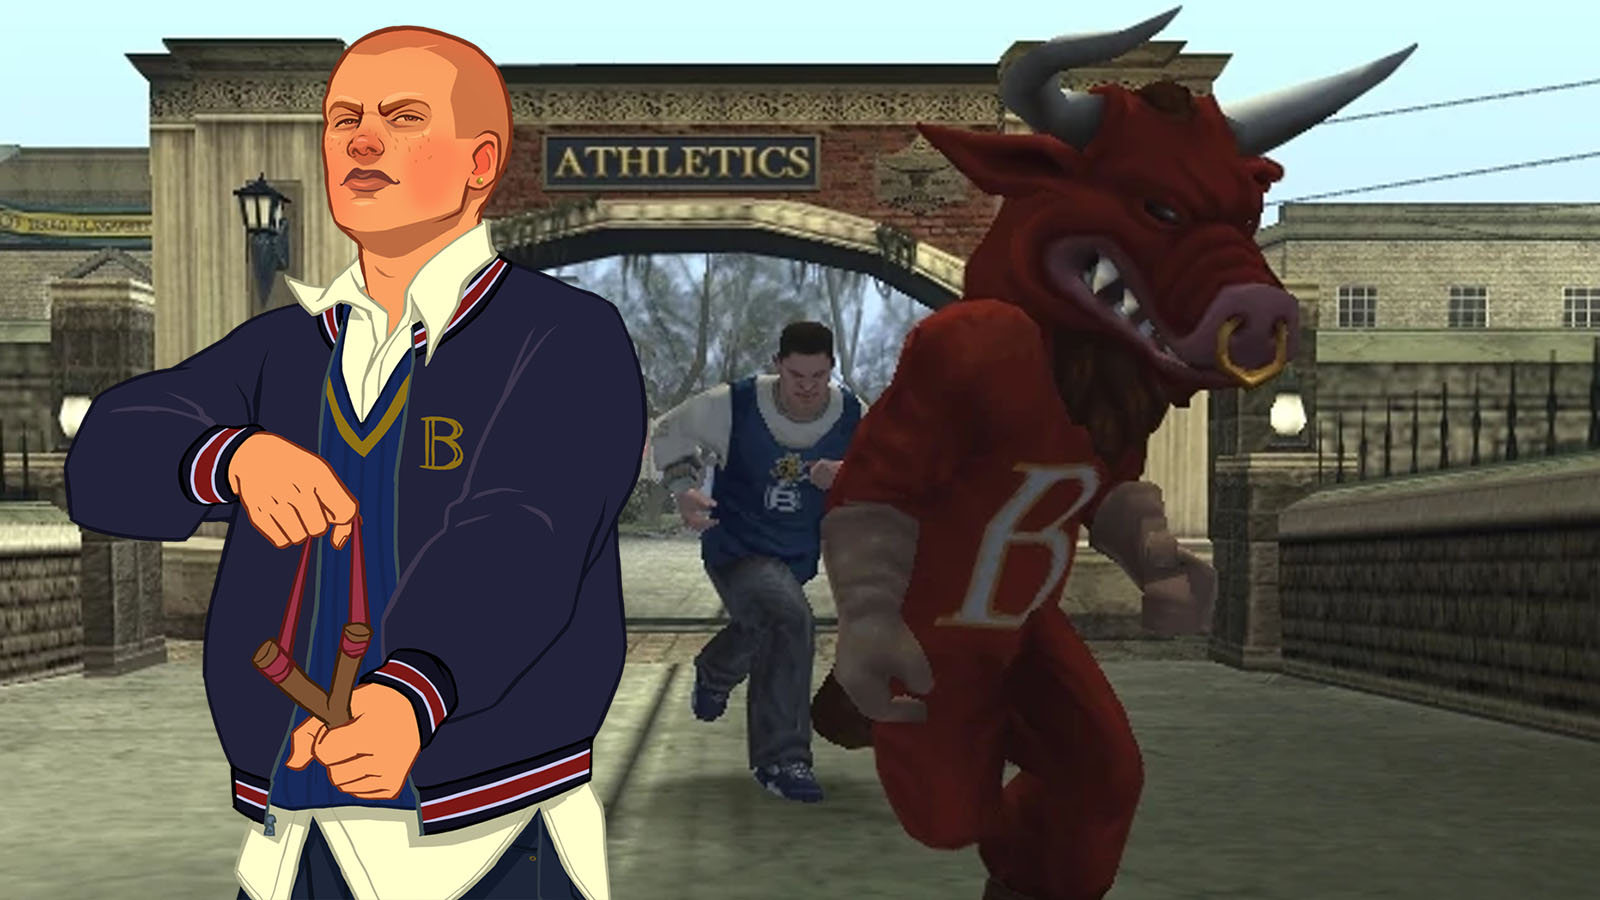 I know they cancelled making bully 2 but I hope with in the next